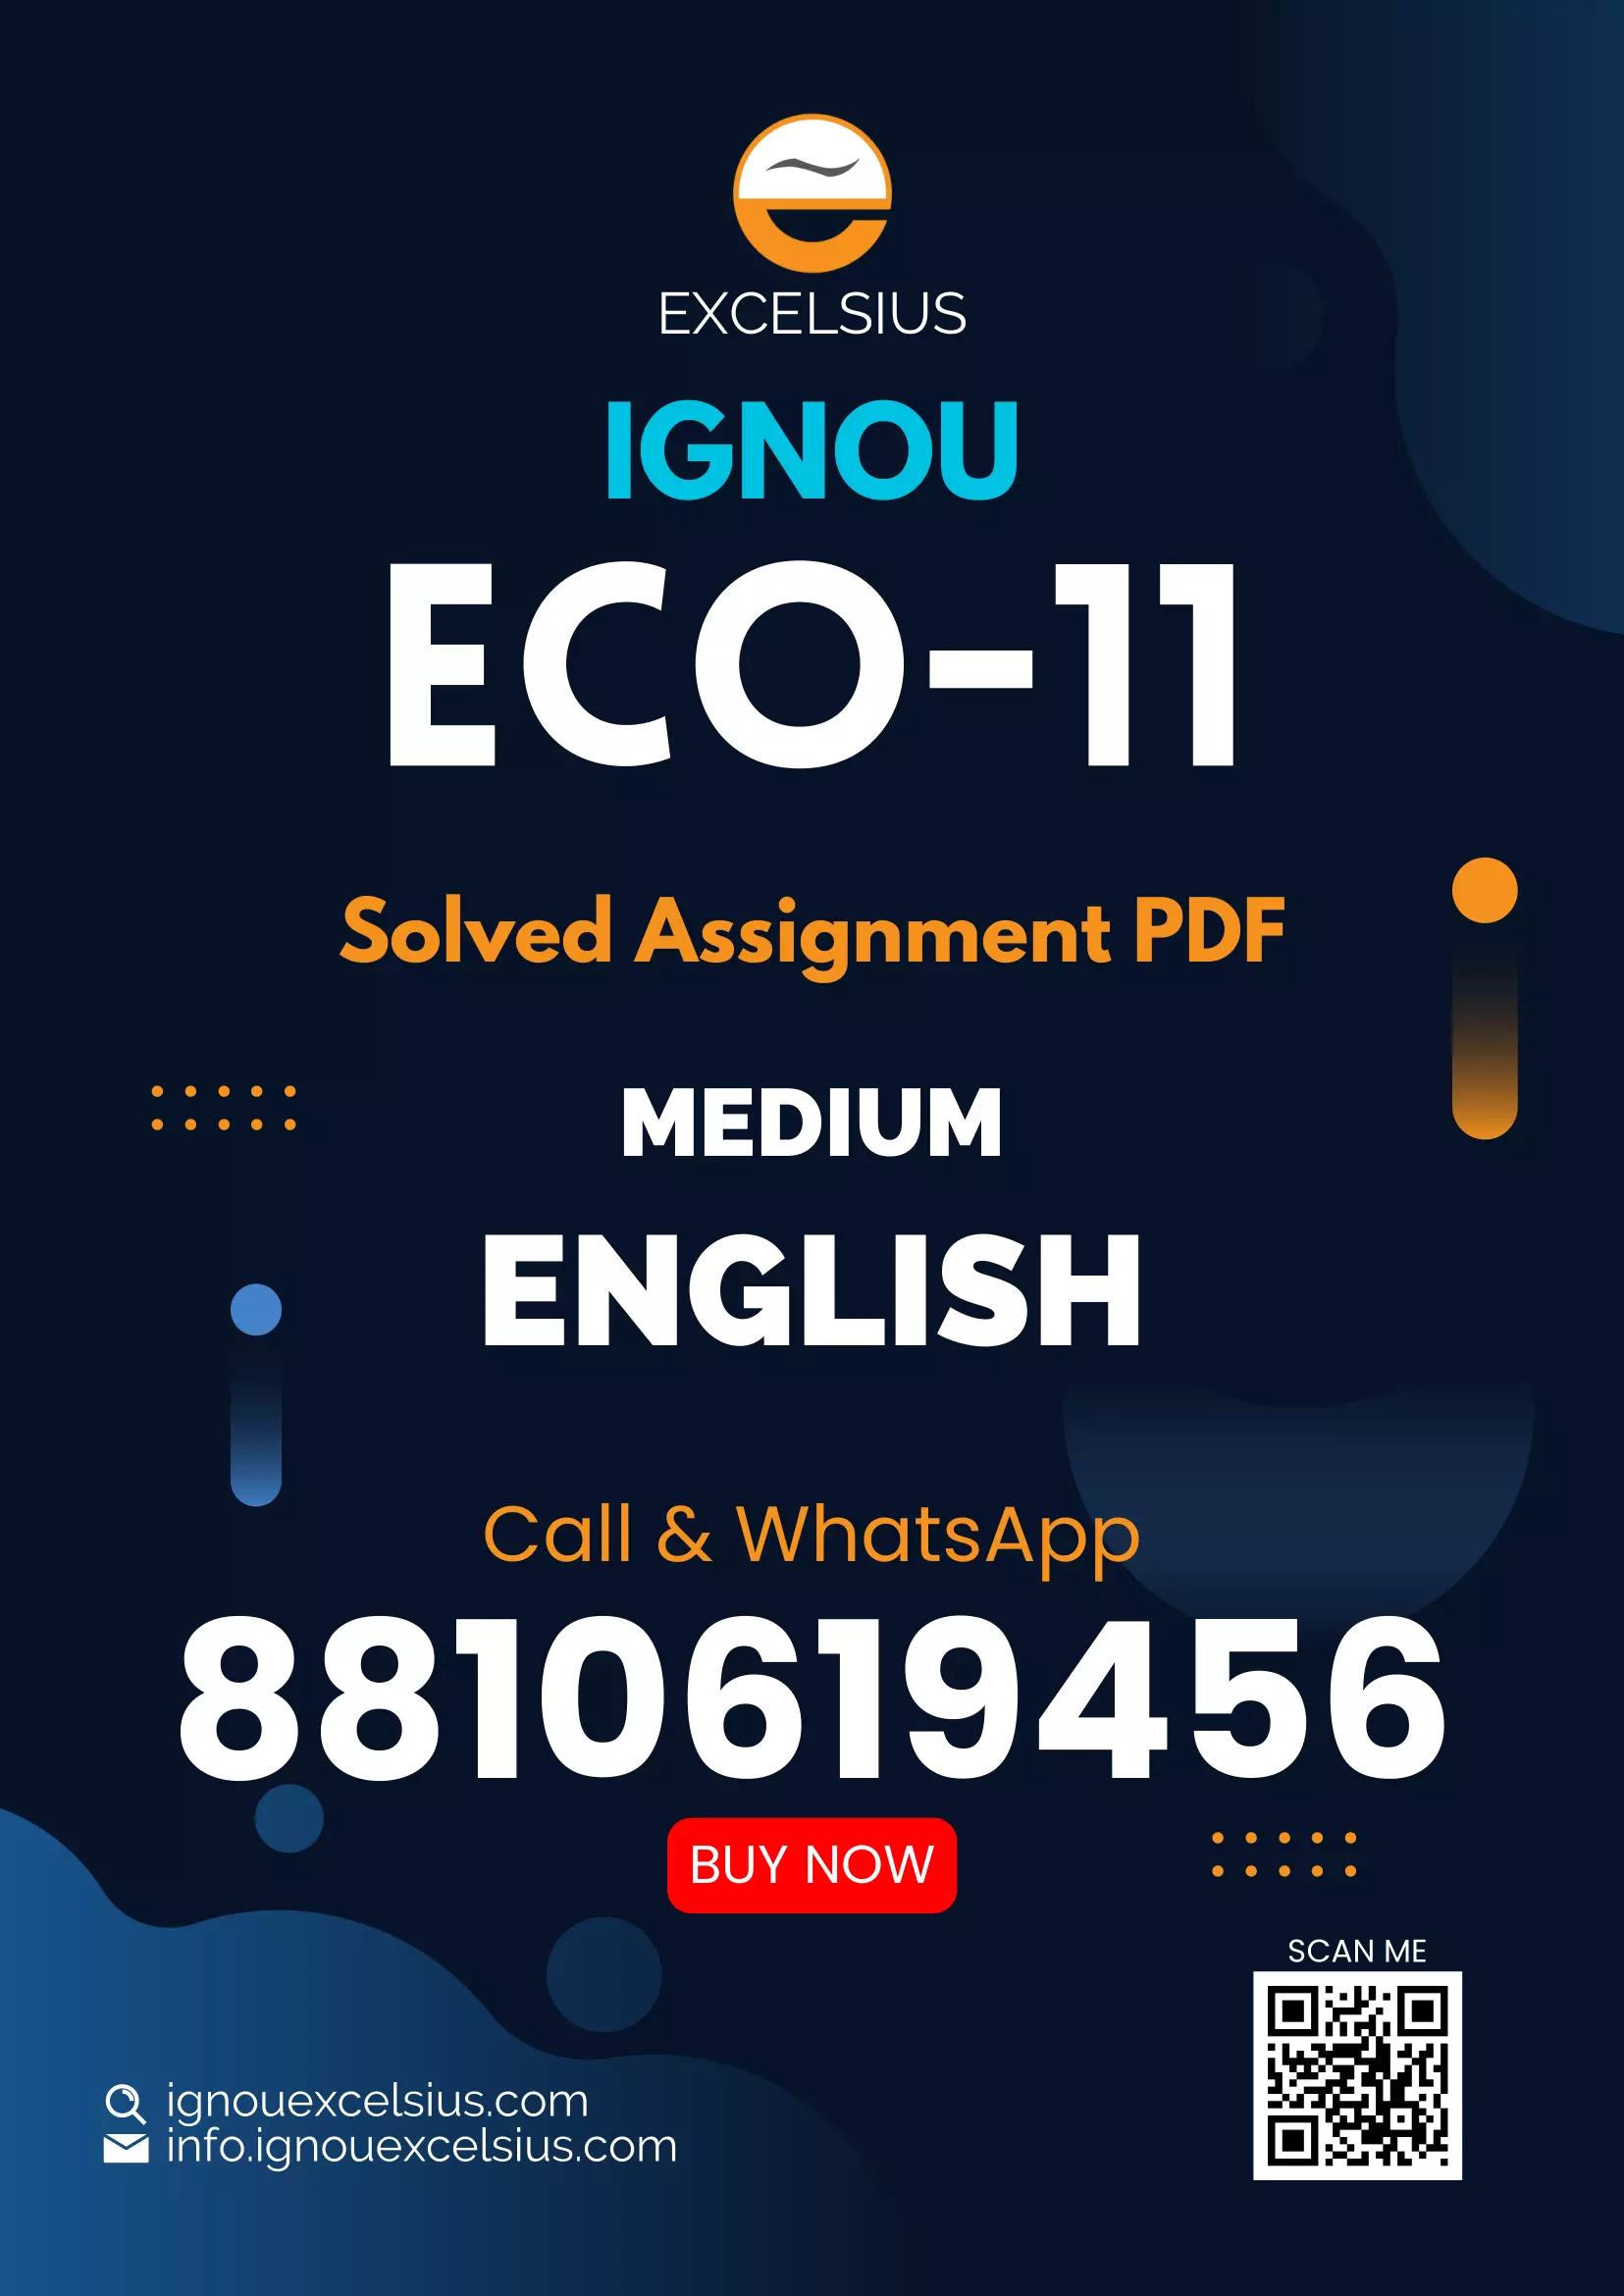 IGNOU ECO-11 - Elements of Income Tax, Latest Solved Assignment-July 2022 – January 2023